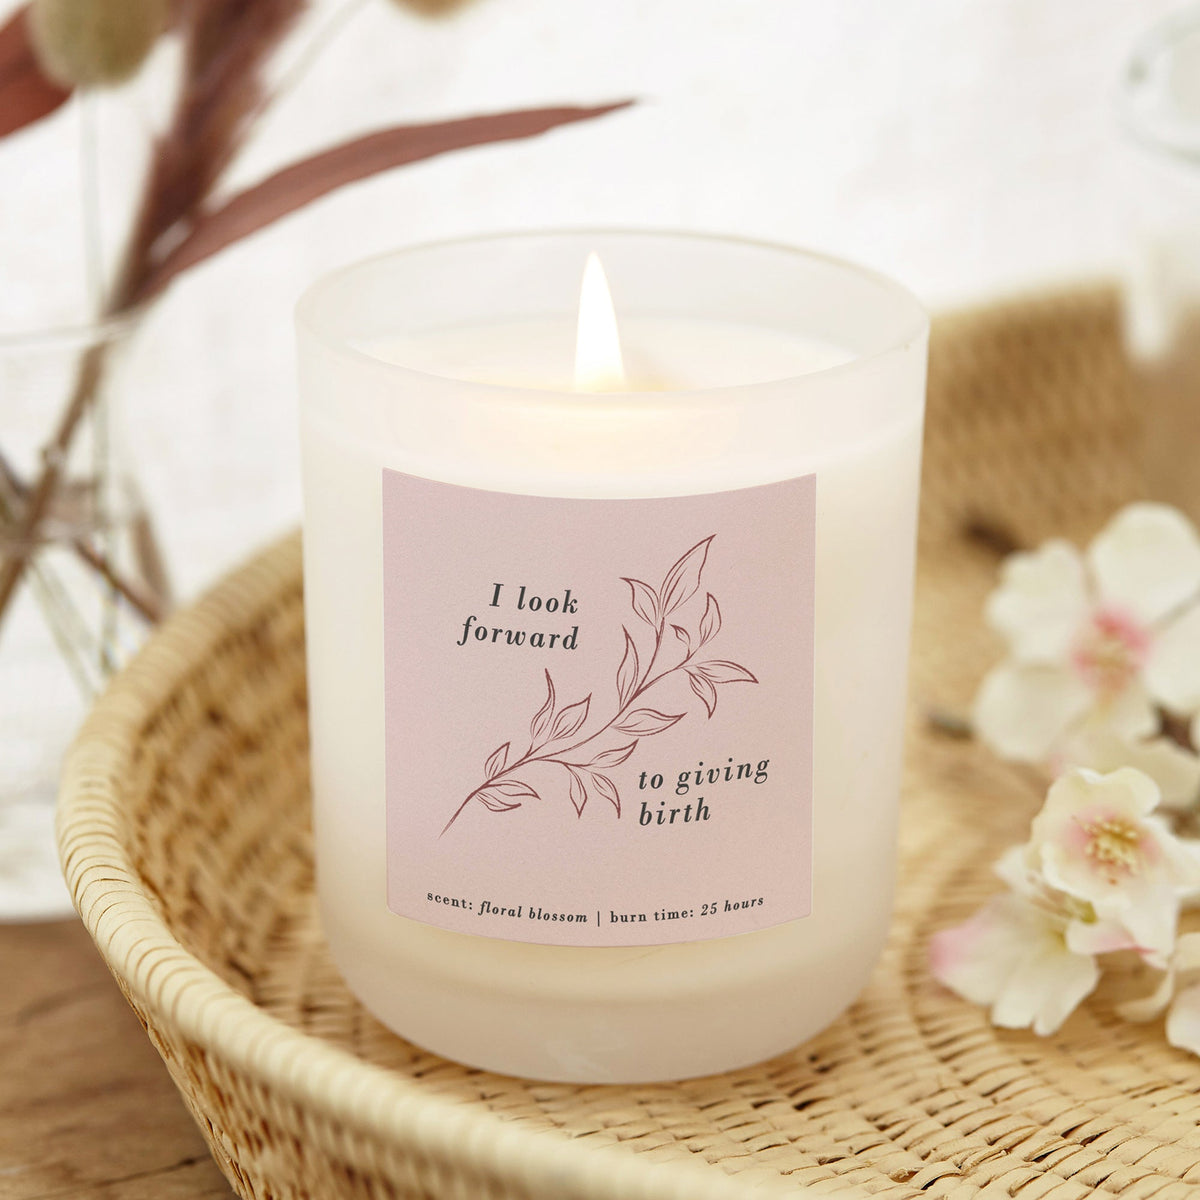 Adore You Candle Wallpapers